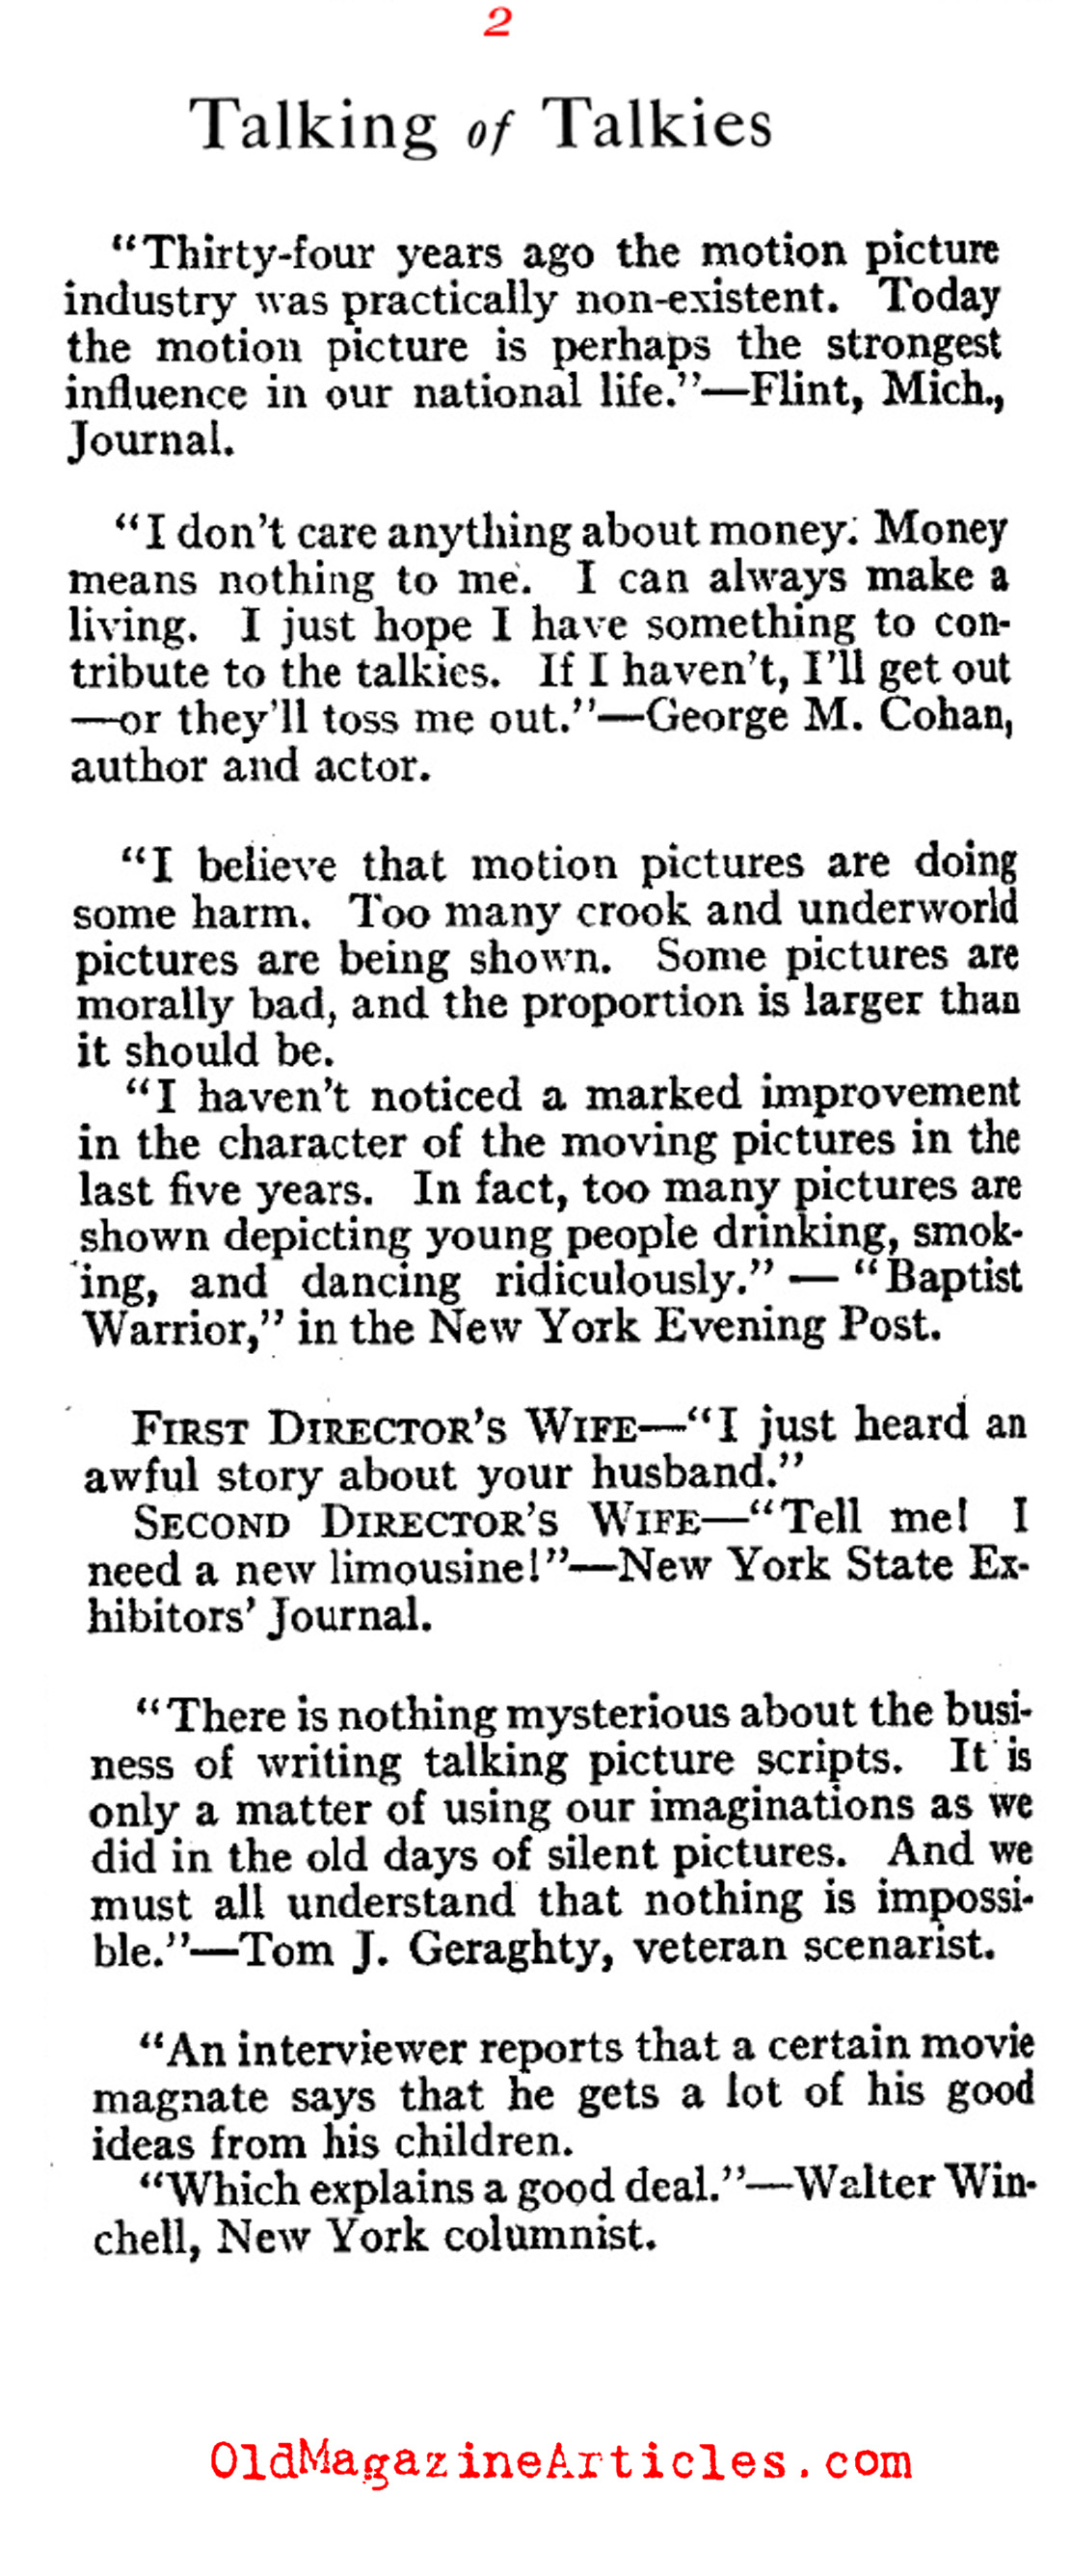 Various Remarks About the First Talkies (Photoplay Magazine, 1930)